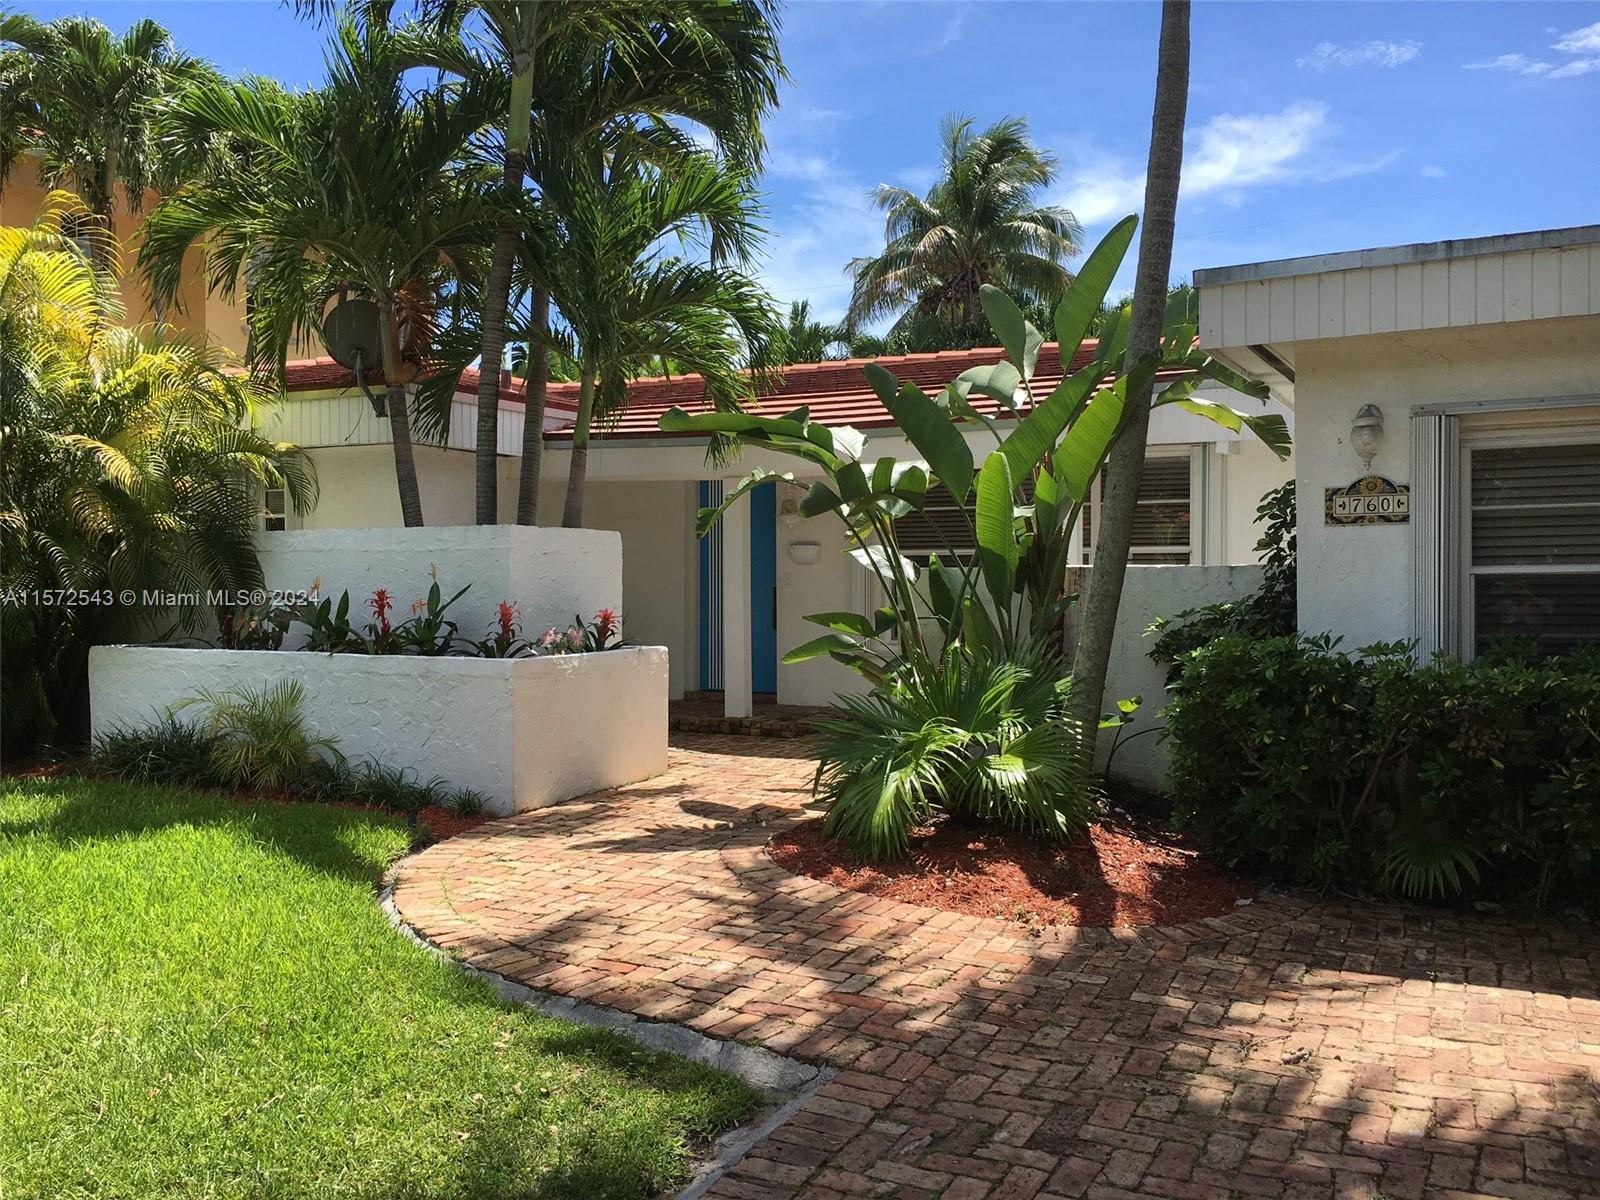 760 Allendale Rd Rd, Key Biscayne, Miami-Dade County, Florida - 4 Bedrooms  
3 Bathrooms - 